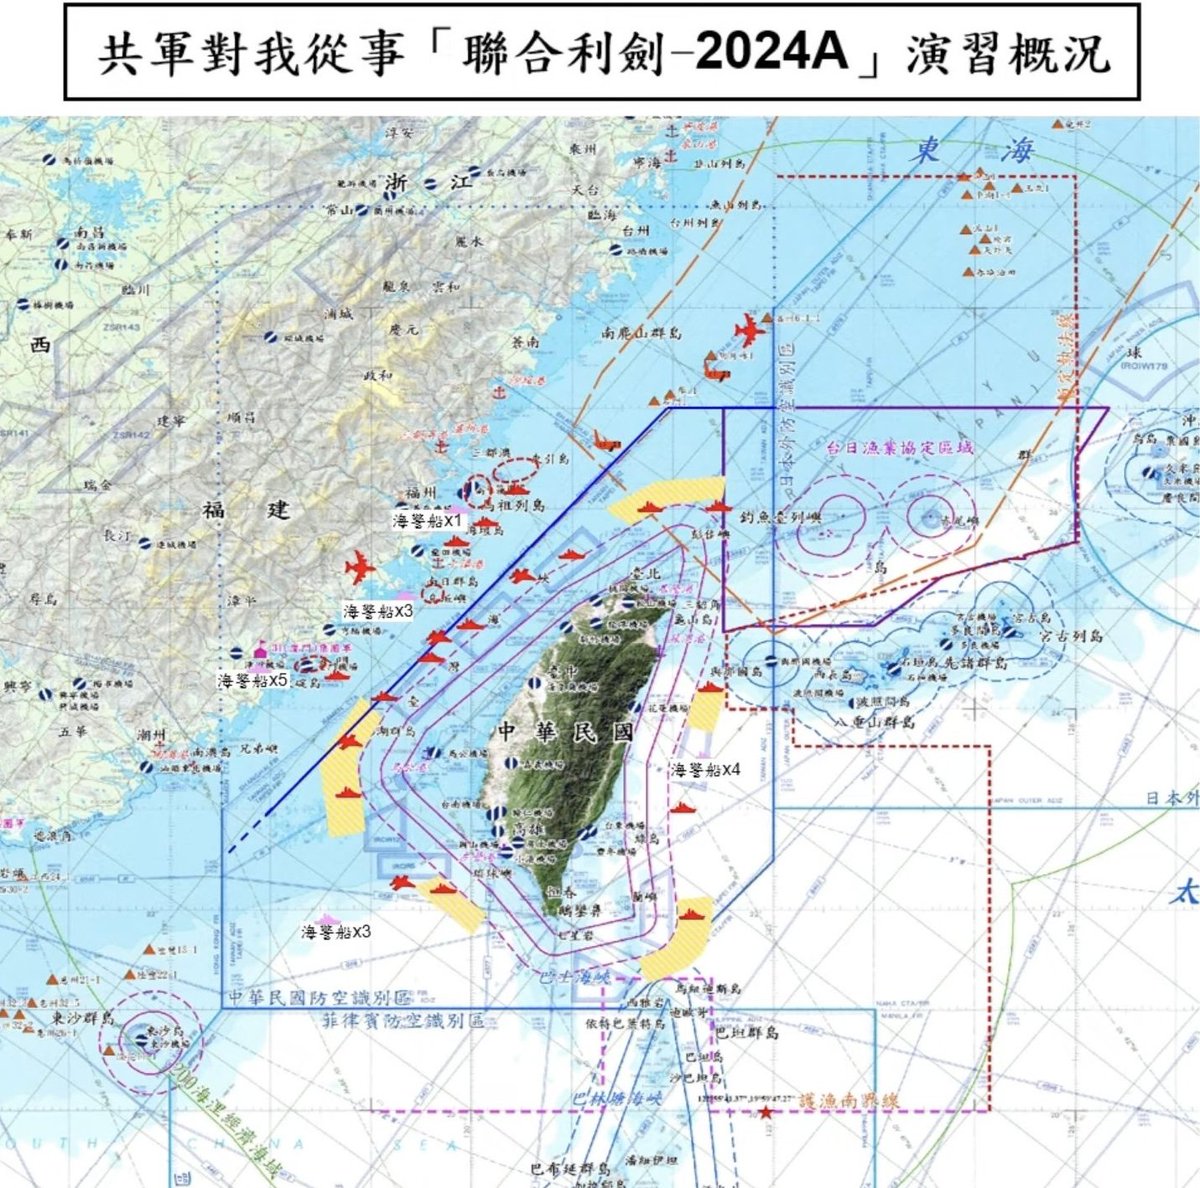 #Breaking #Chinese military has encircled #Taiwan in the name of a massive military exercise, ‘Joint Sword-2024A’. Taiwan has took it as grave provocation and moved it's anti ship Aircrafts and Military machinery. #China #SouthChinaSea #War2 #Viral #TejRan #Cyclone